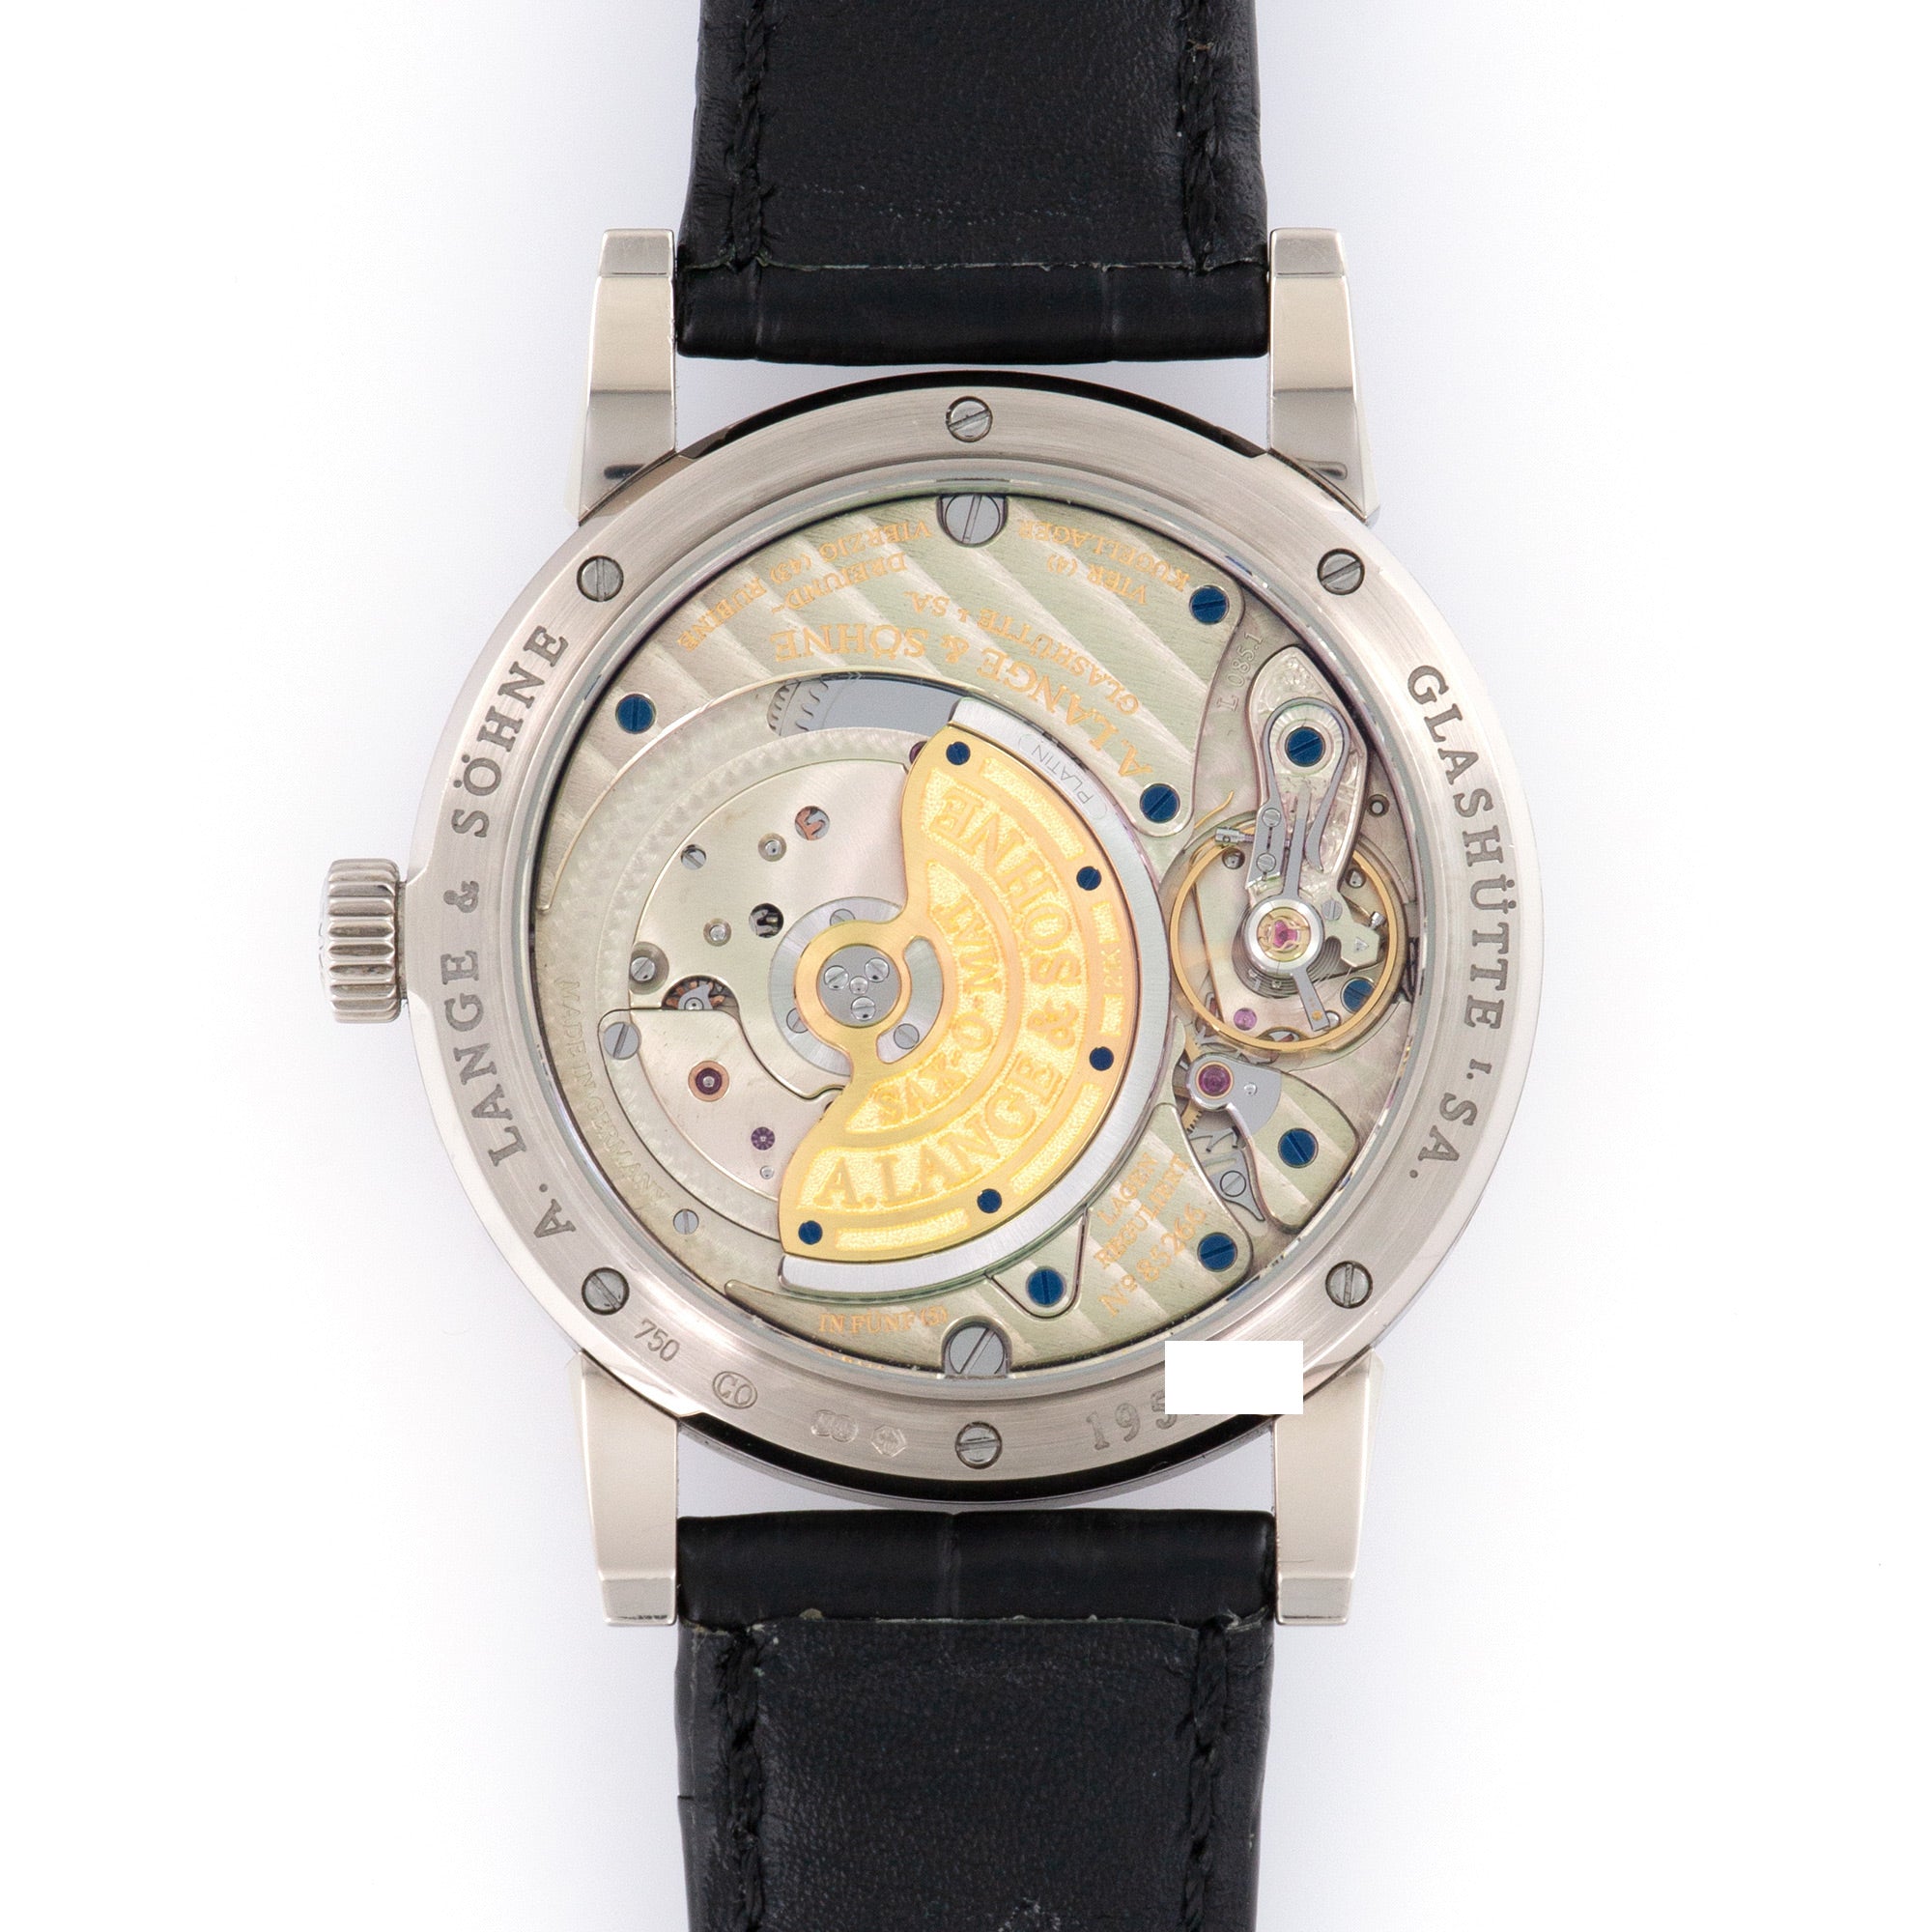 A. Lange &amp; Sohne - A. Lange &amp; Sohne Saxonia Annual Calendar Watch, Ref. 330.026 - The Keystone Watches